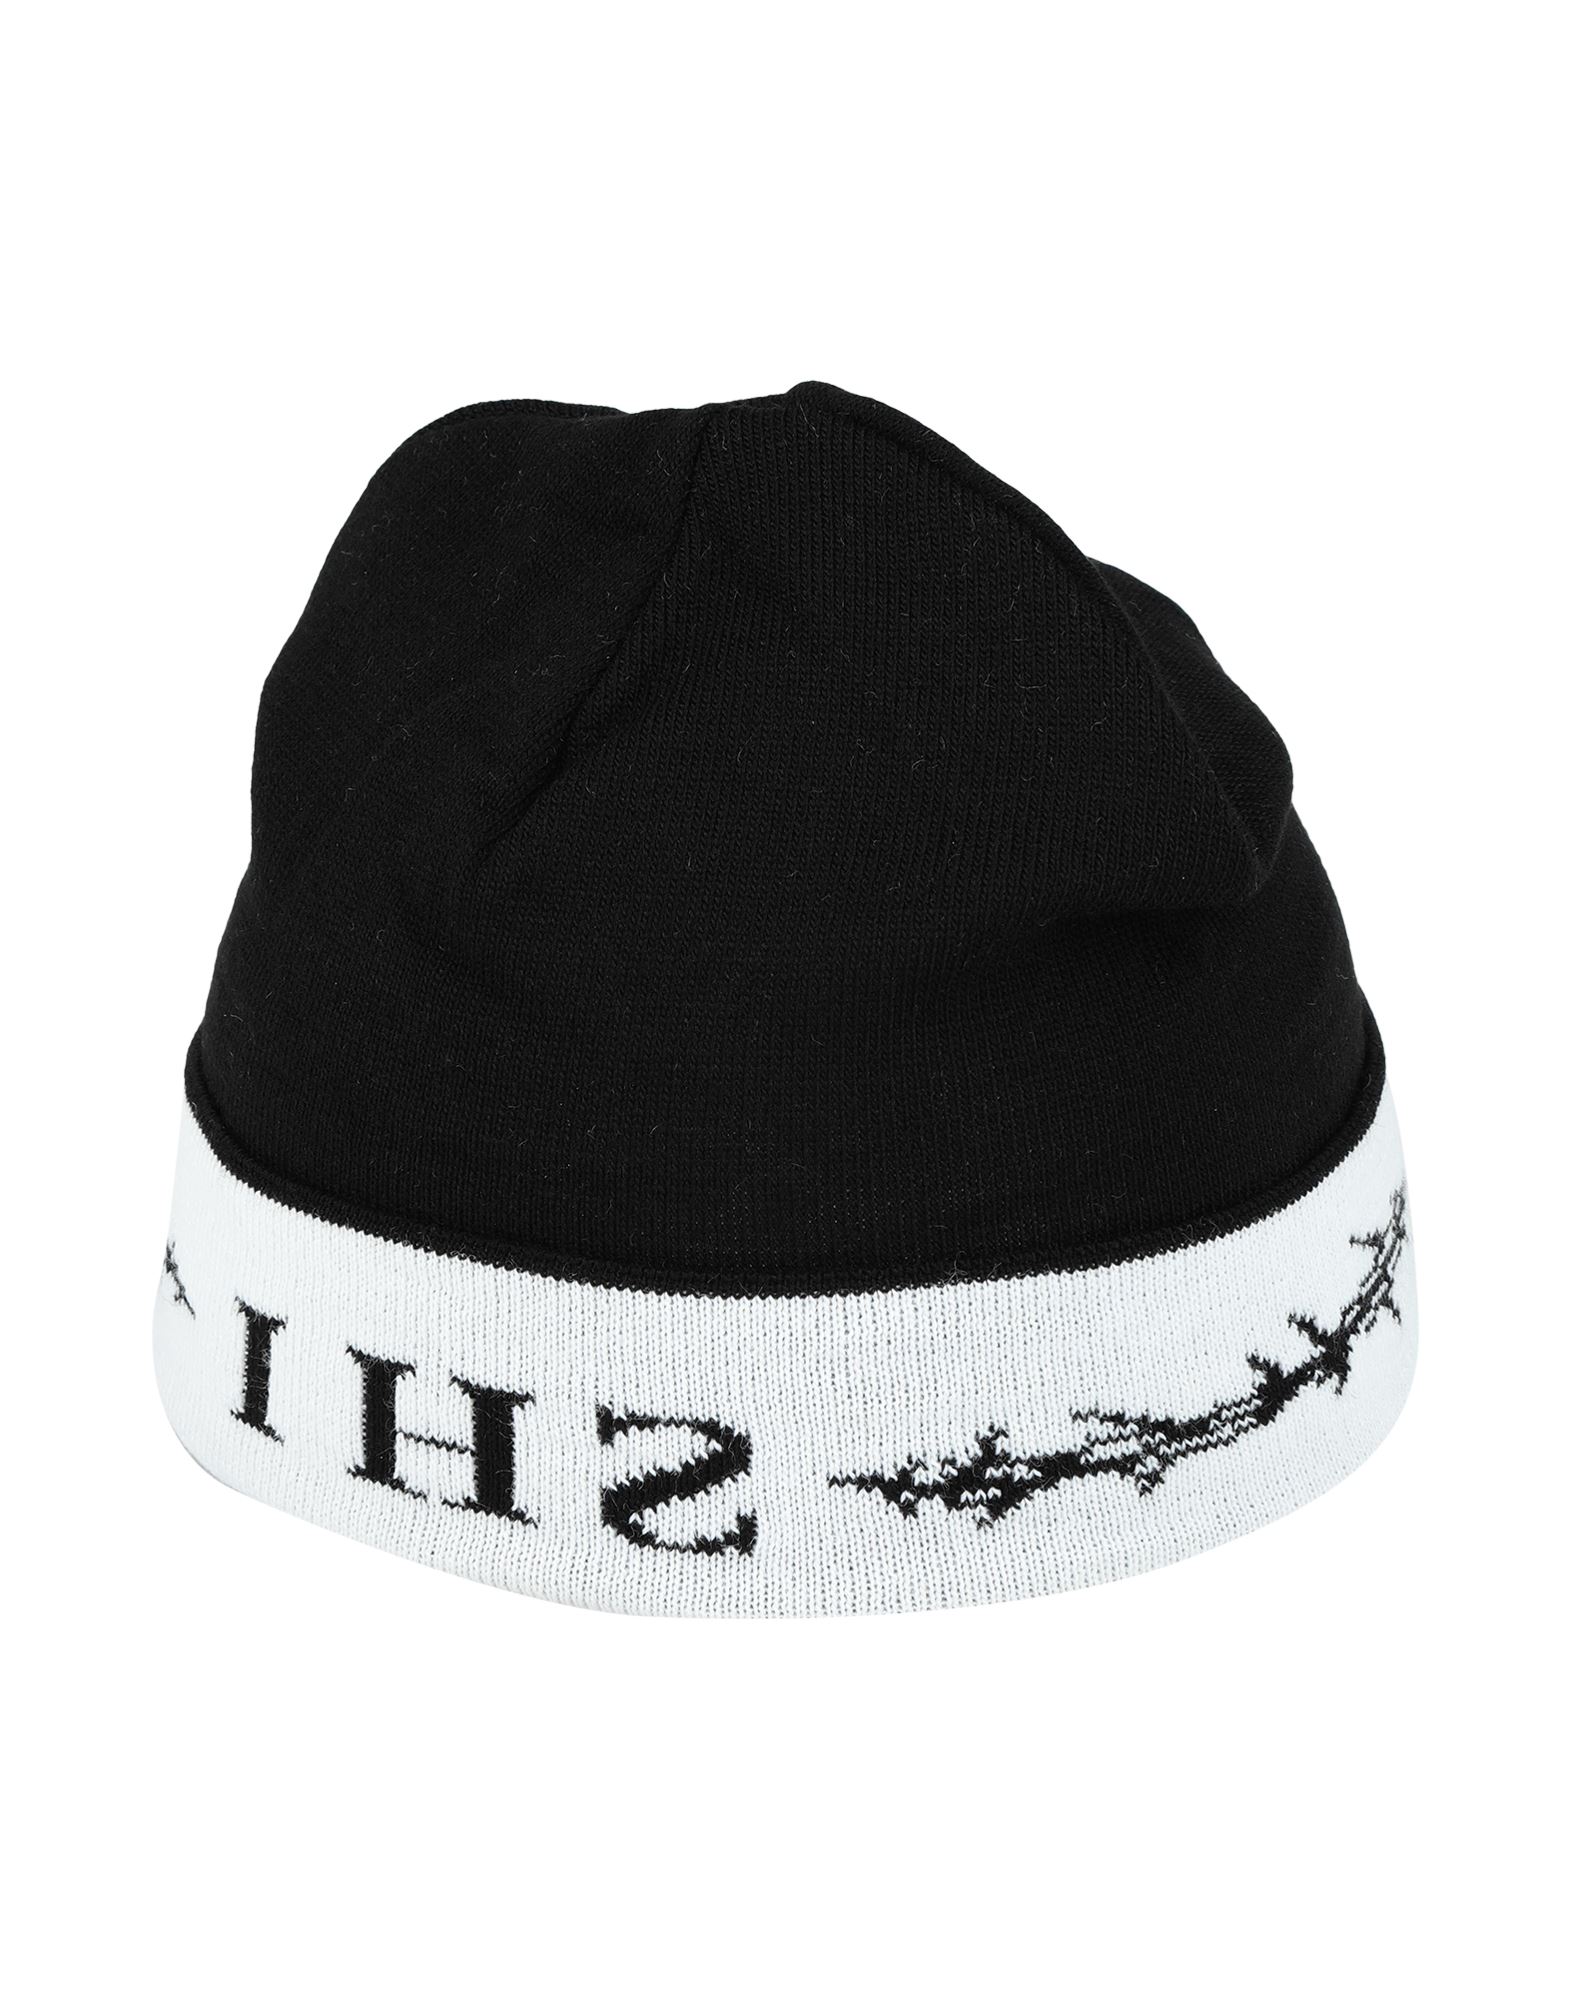 Ihs Hats In Black